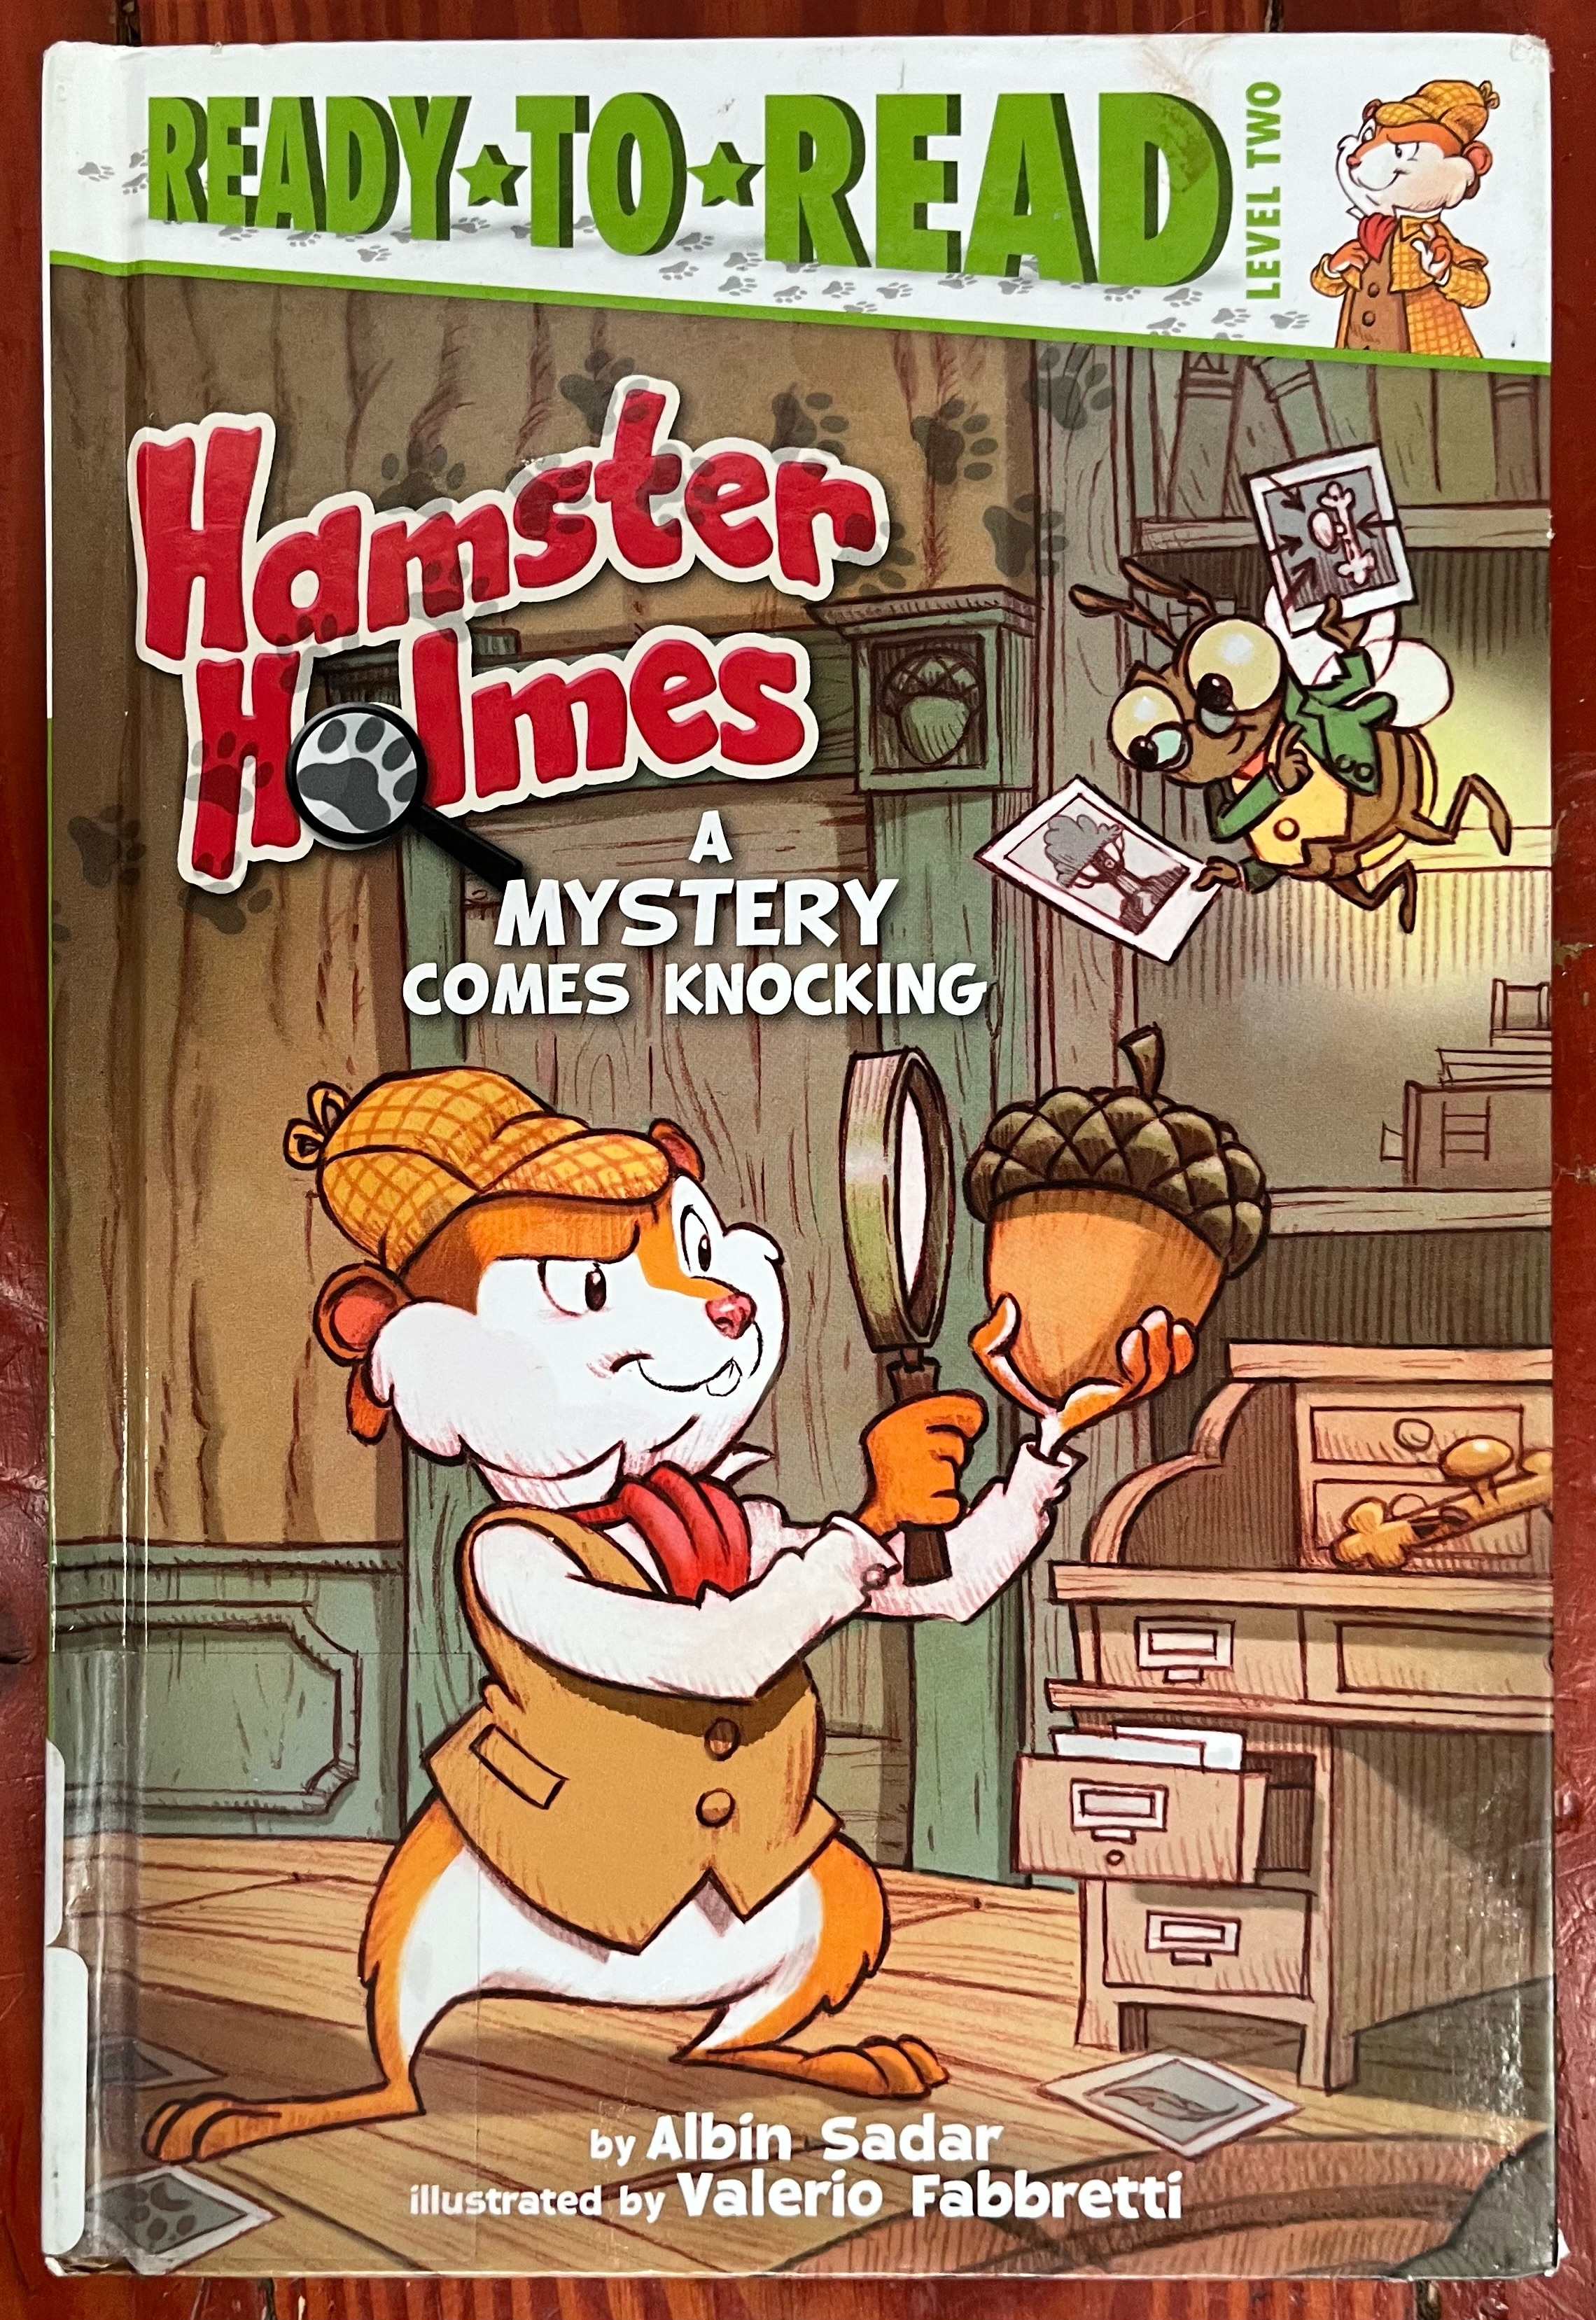 Hamster Holmes: A Mystery Comes Knocking easy reader book for kids ready to read by Albin Sadar